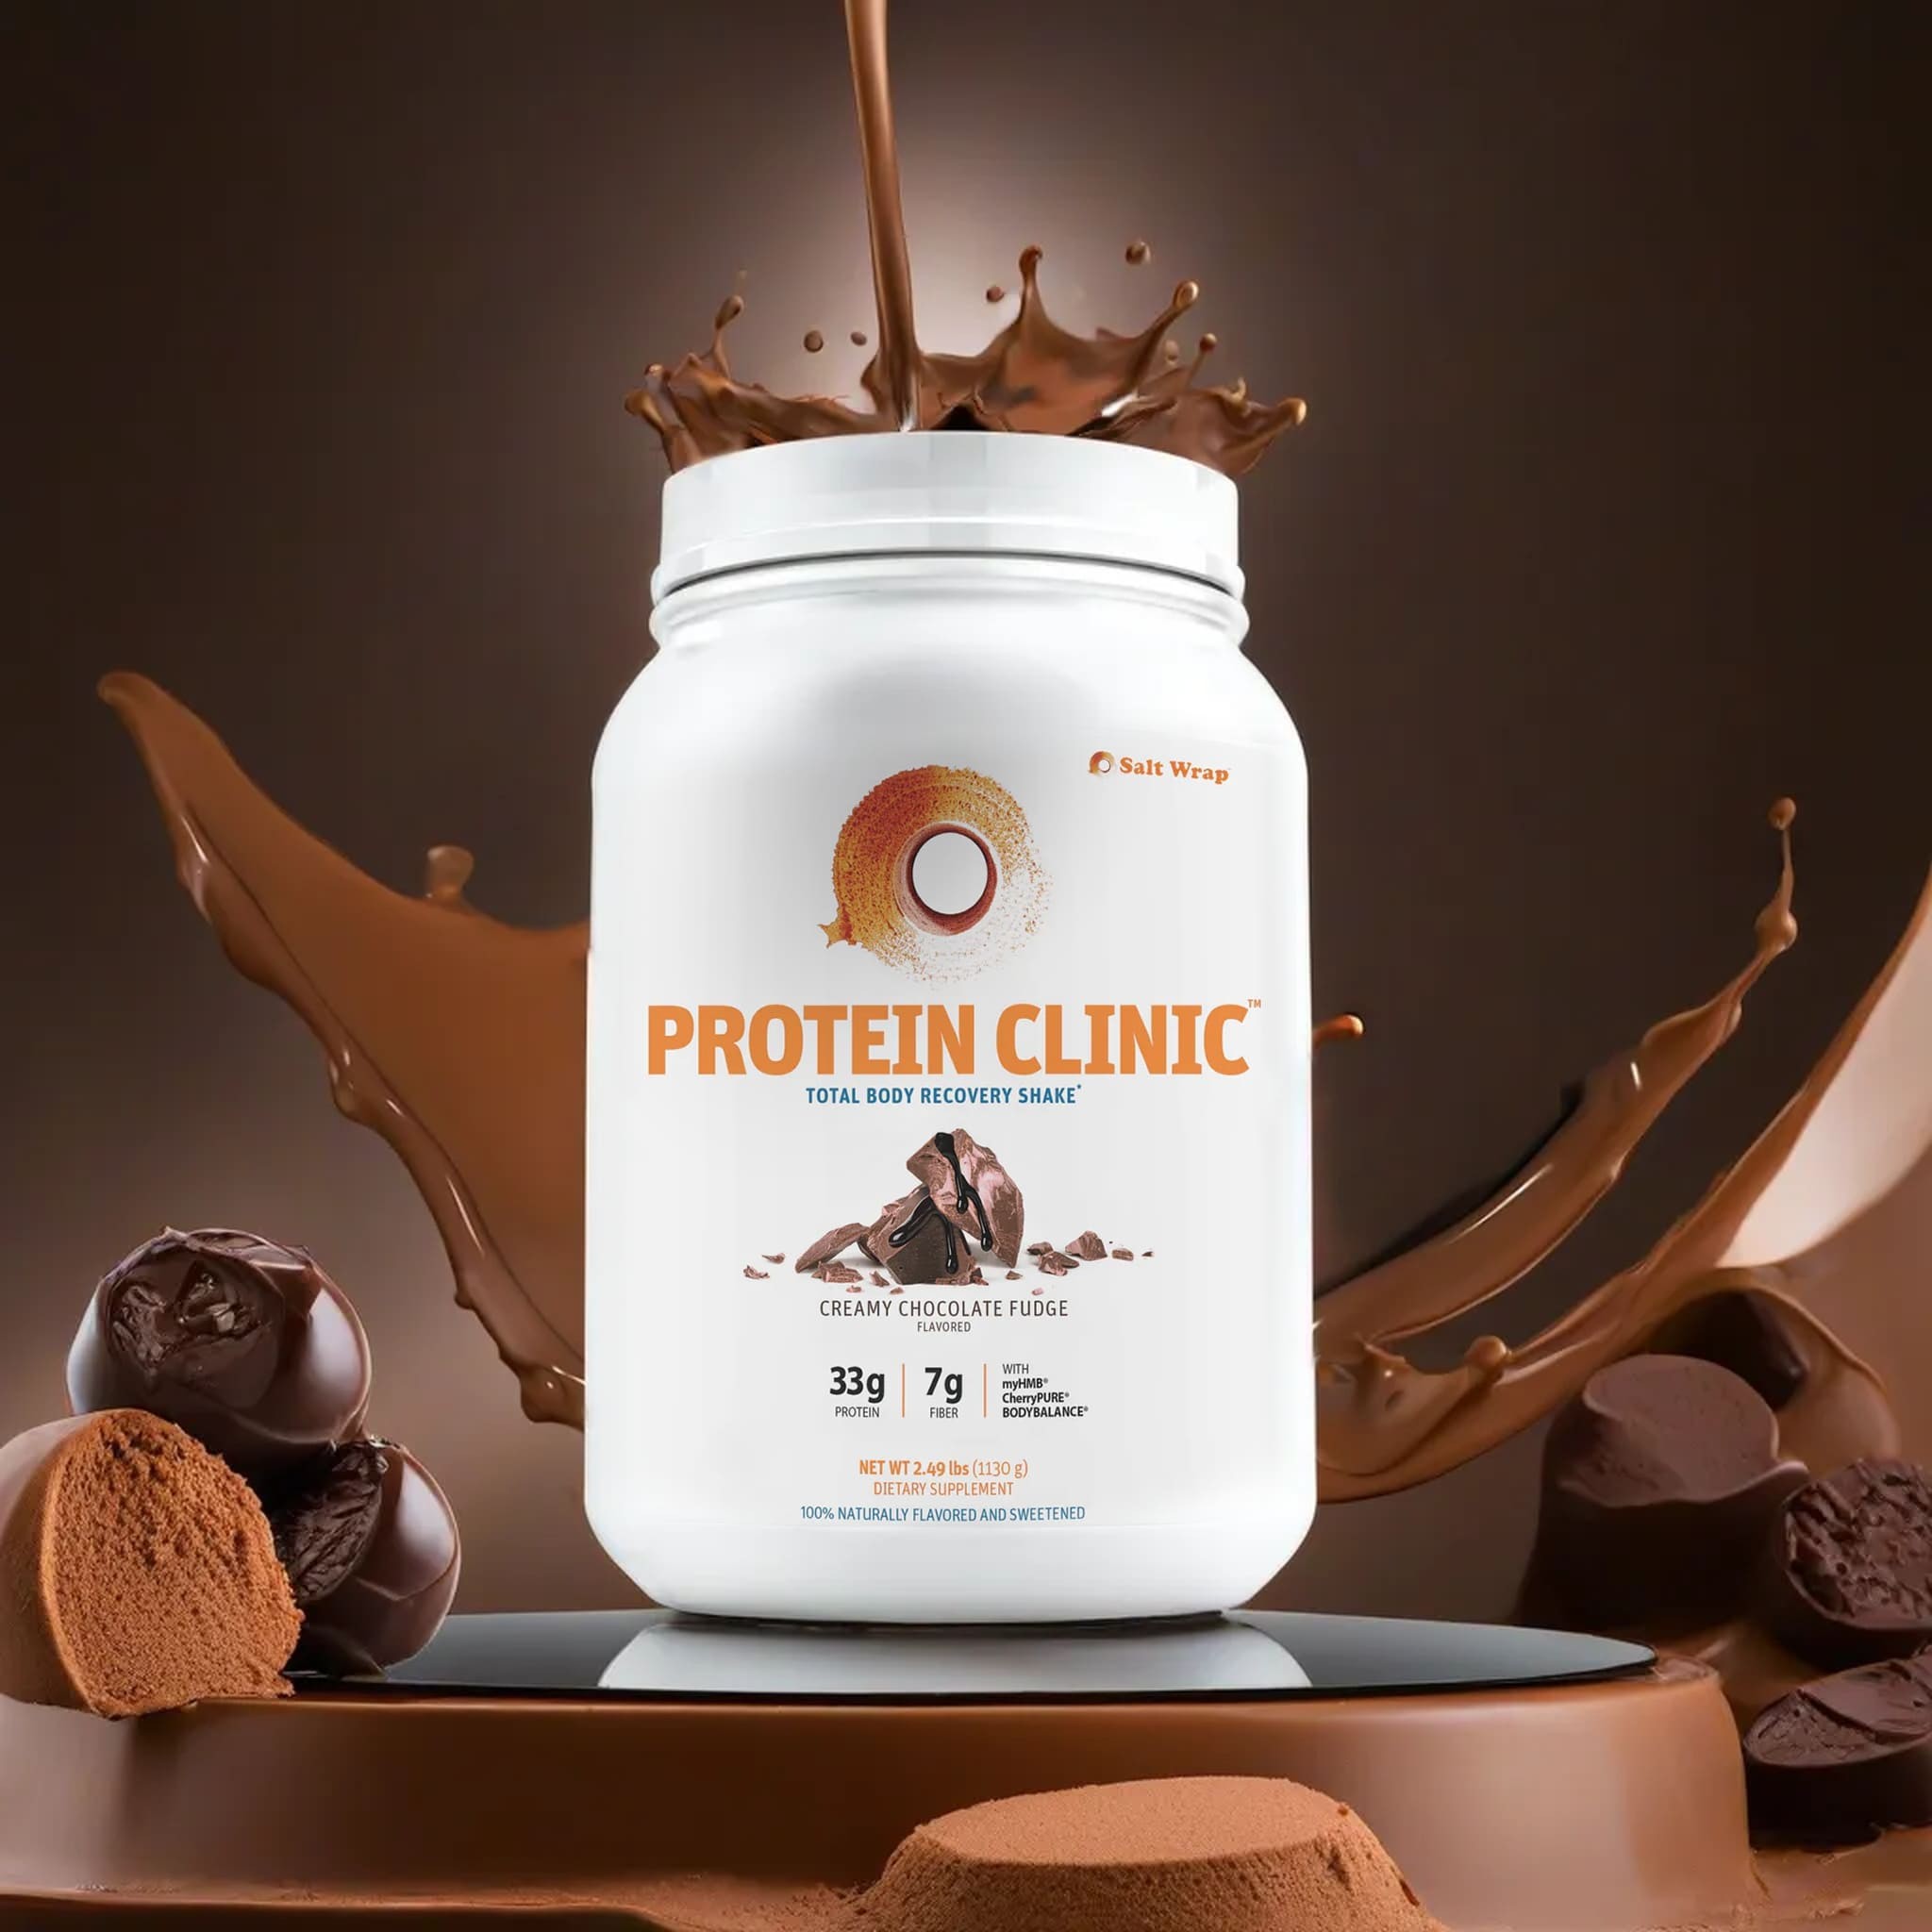 You’re going to love the new Creamy Chocolate Fudge Protein Clinic™.